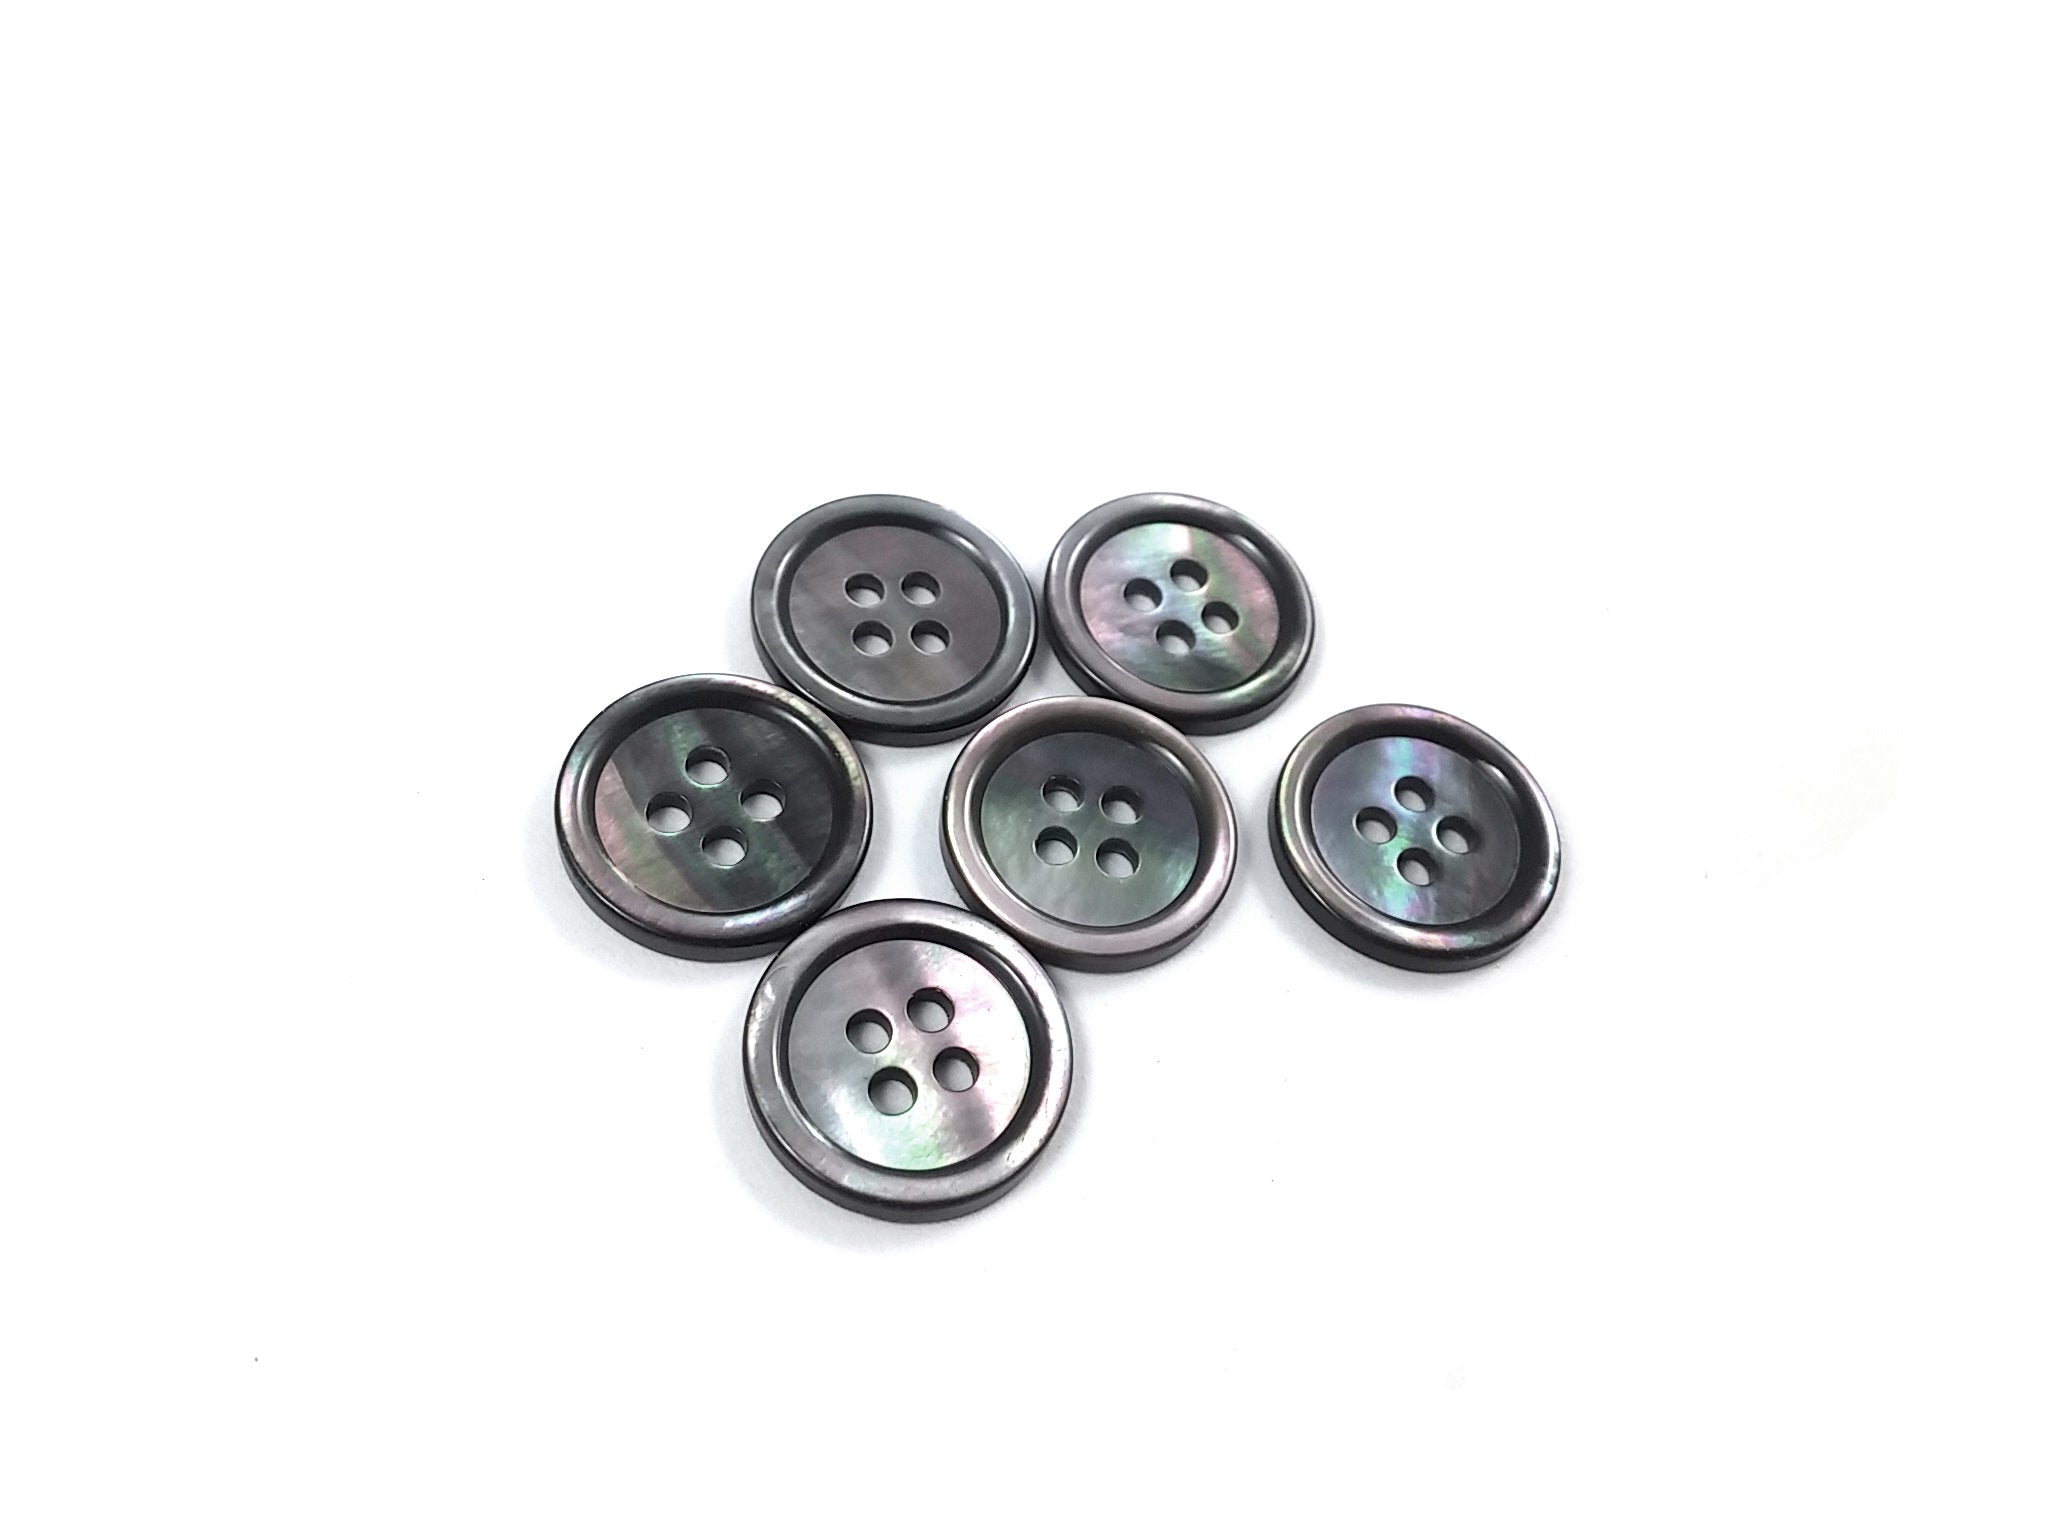 Trochus Shell Buttons 11 or 15mm - set of 6 eco friendly grey buttons 